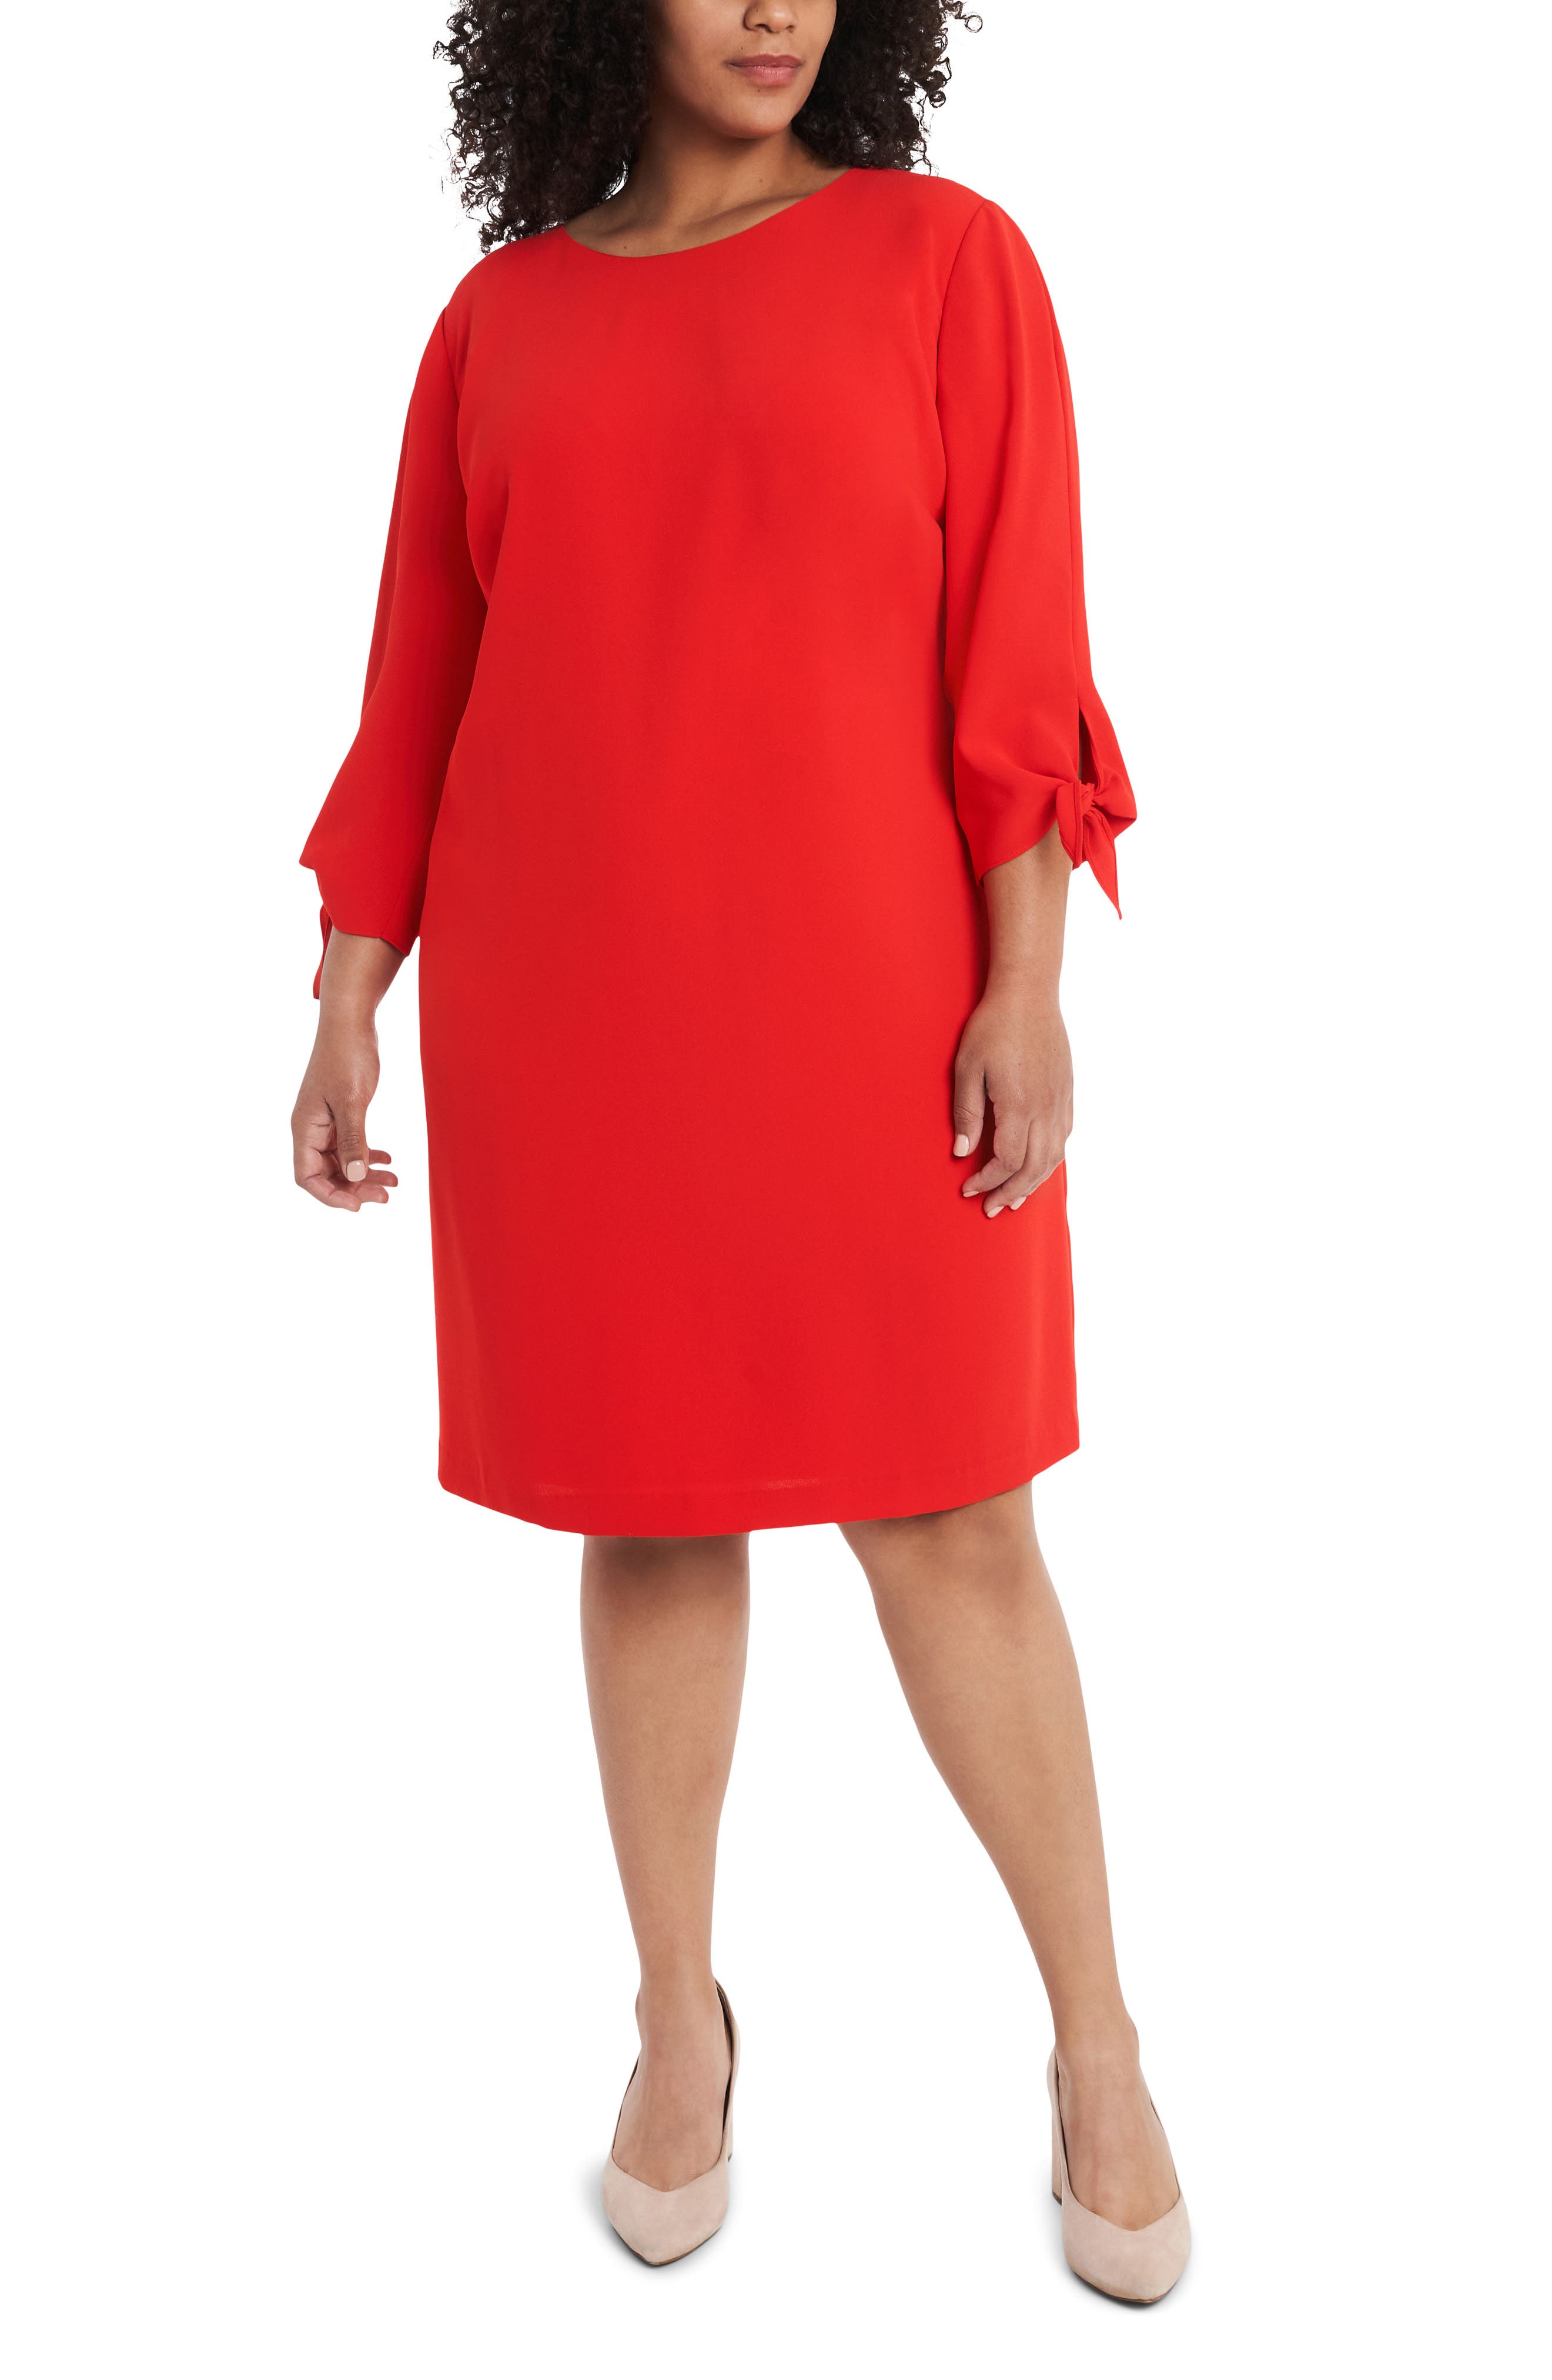 party plus size red dress